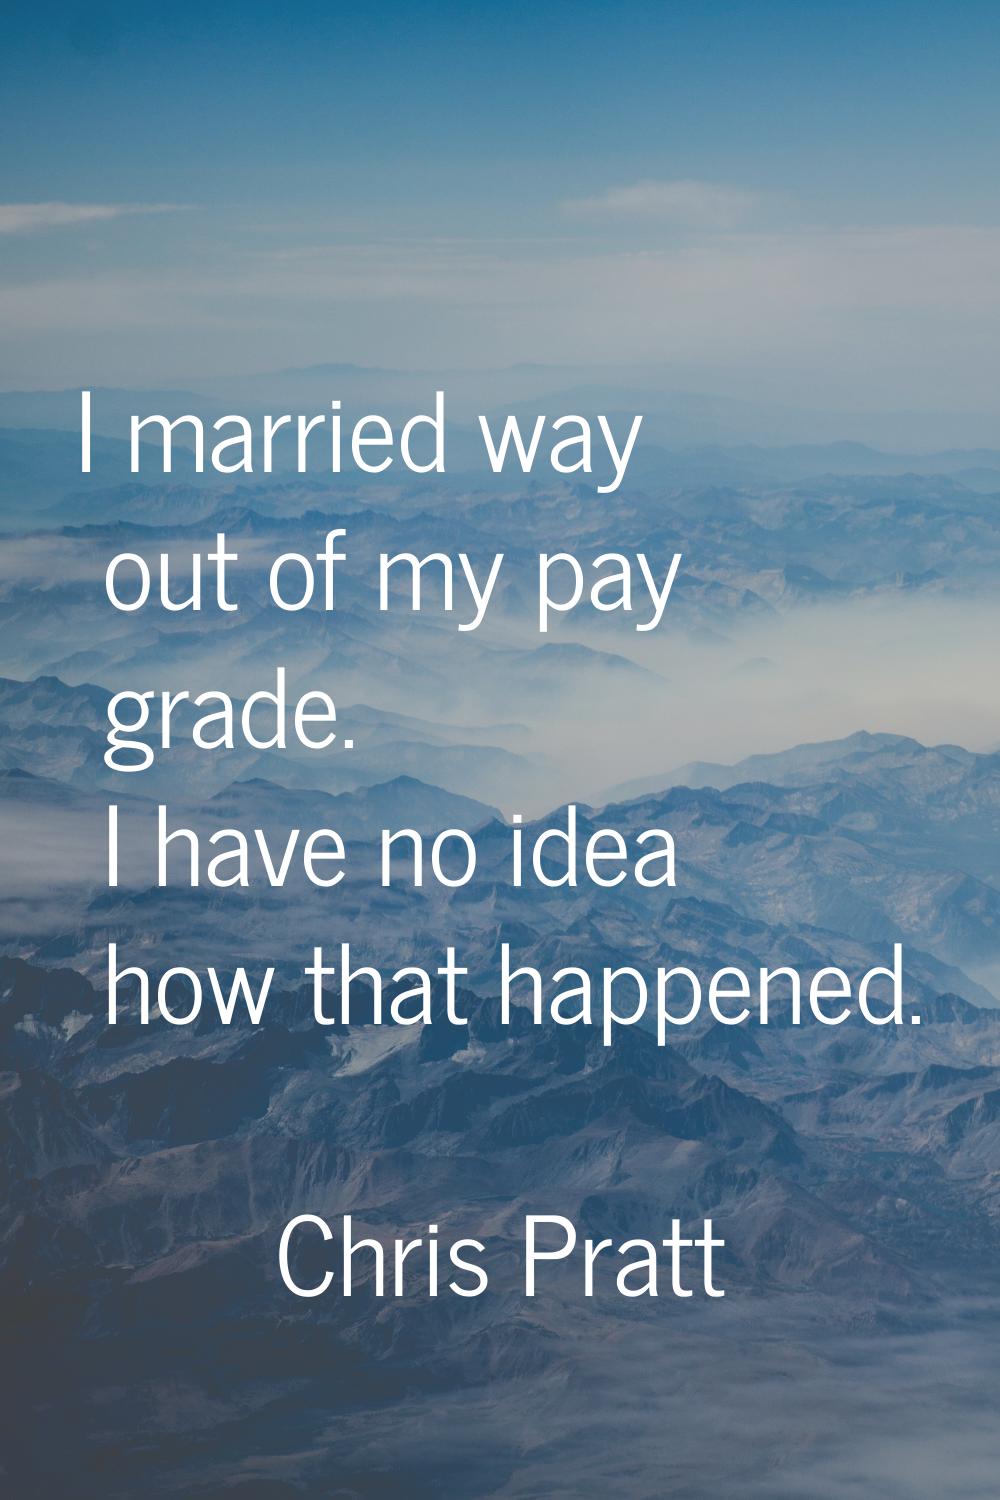 I married way out of my pay grade. I have no idea how that happened.